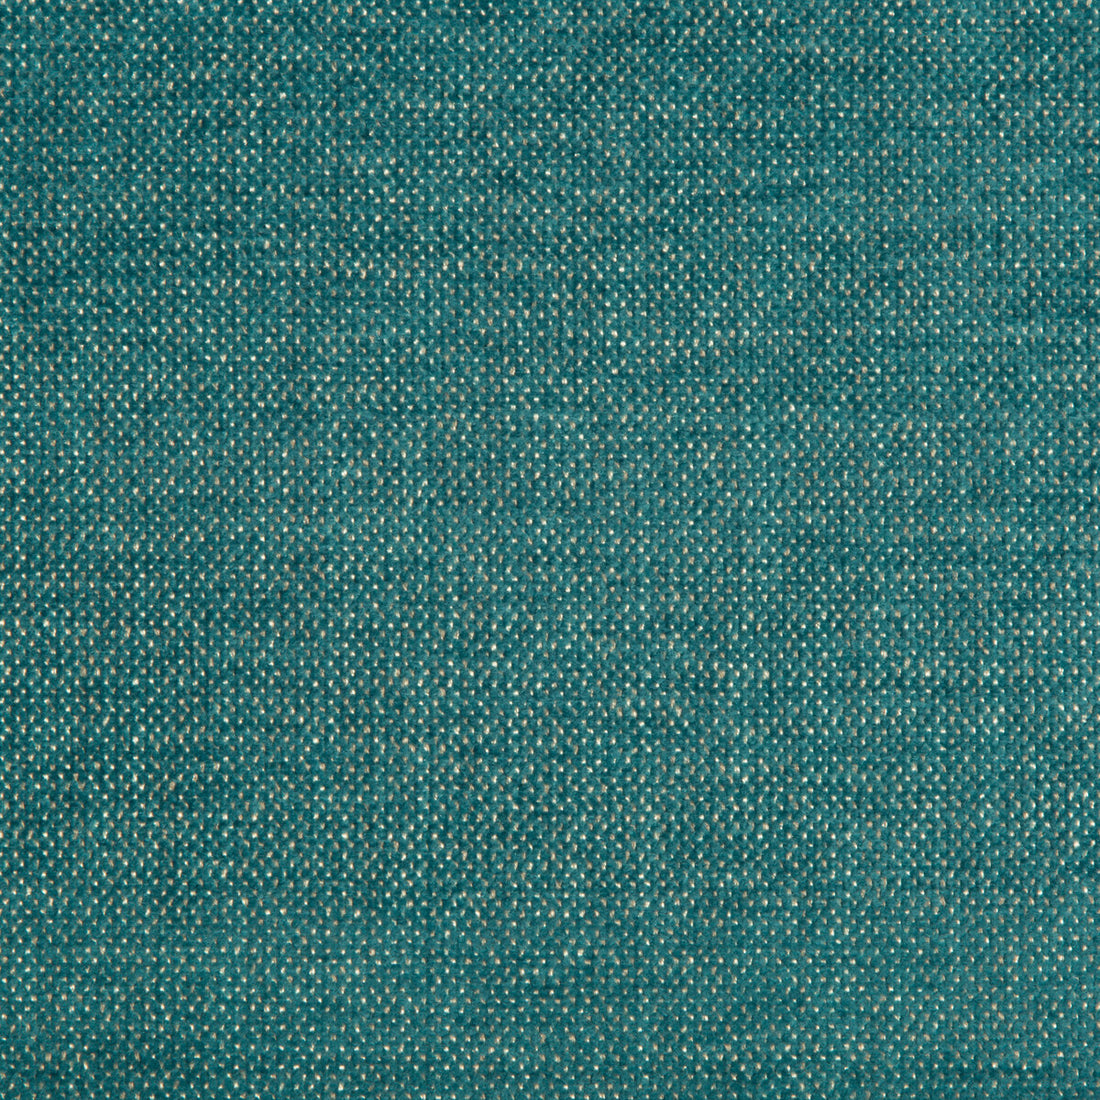 Kravet Contract fabric in 35407-35 color - pattern 35407.35.0 - by Kravet Contract in the Crypton Incase collection